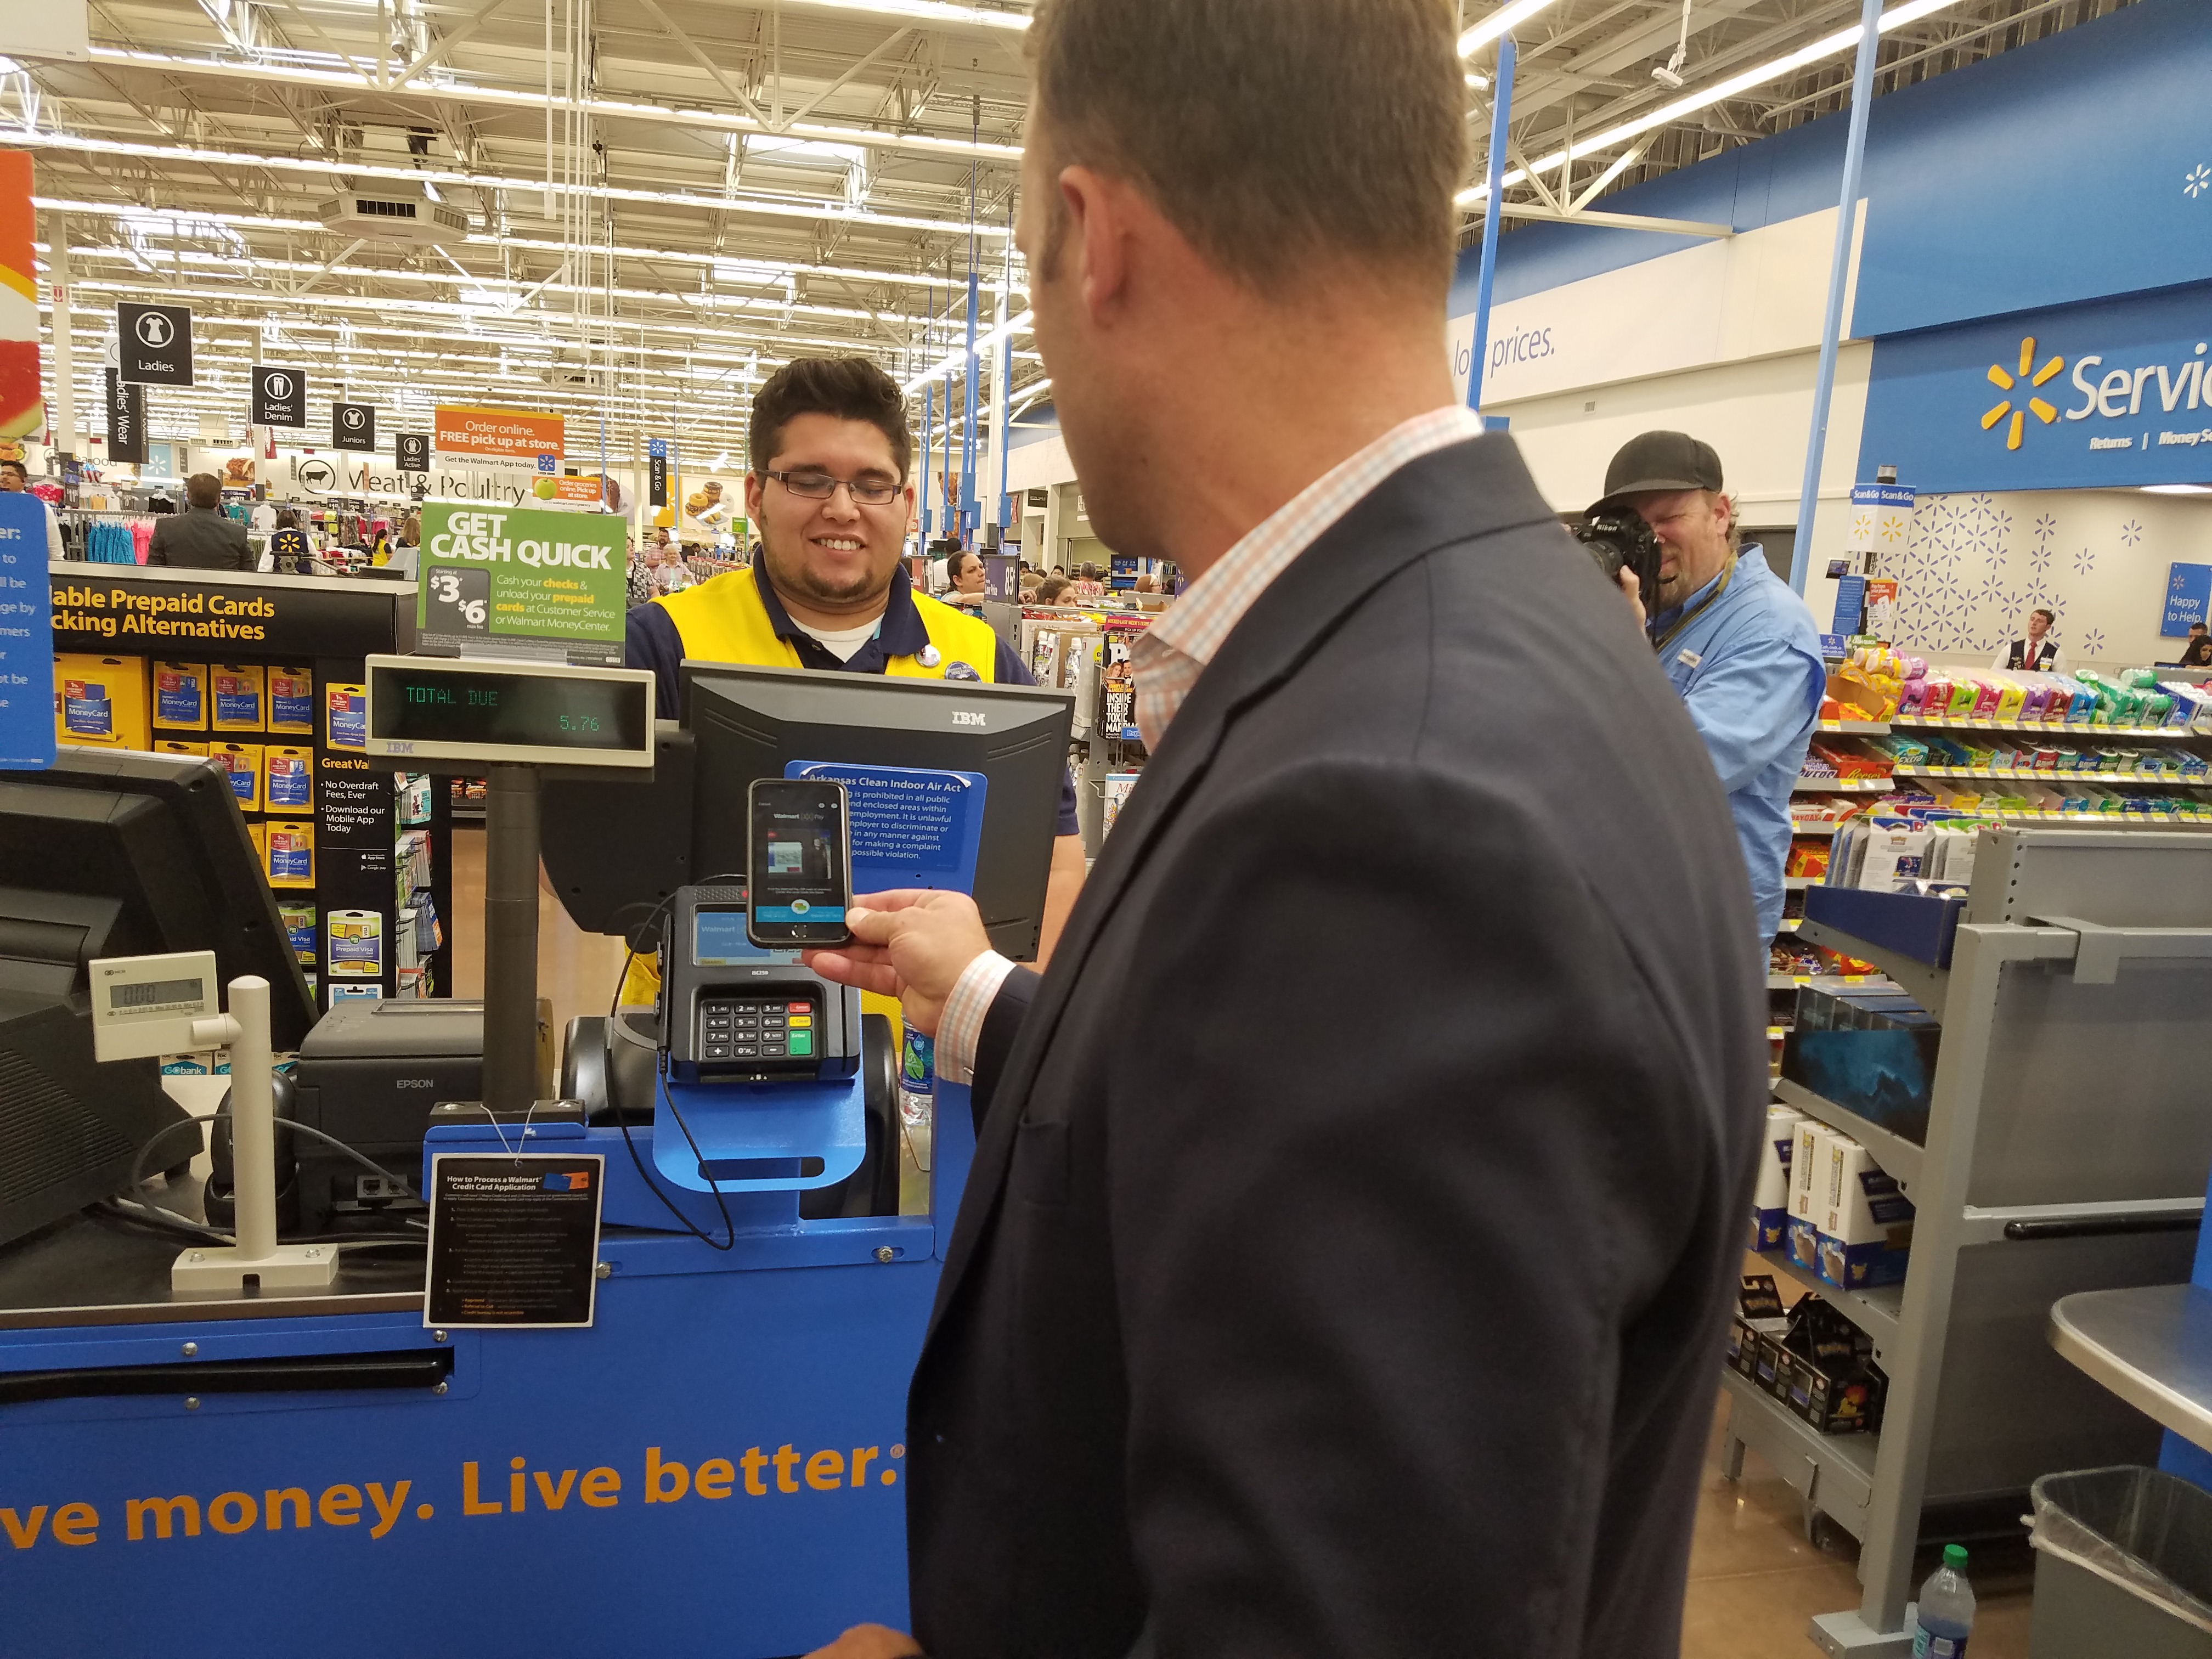 Don't Touch: Walmart enables customers to pay, pick up without contact